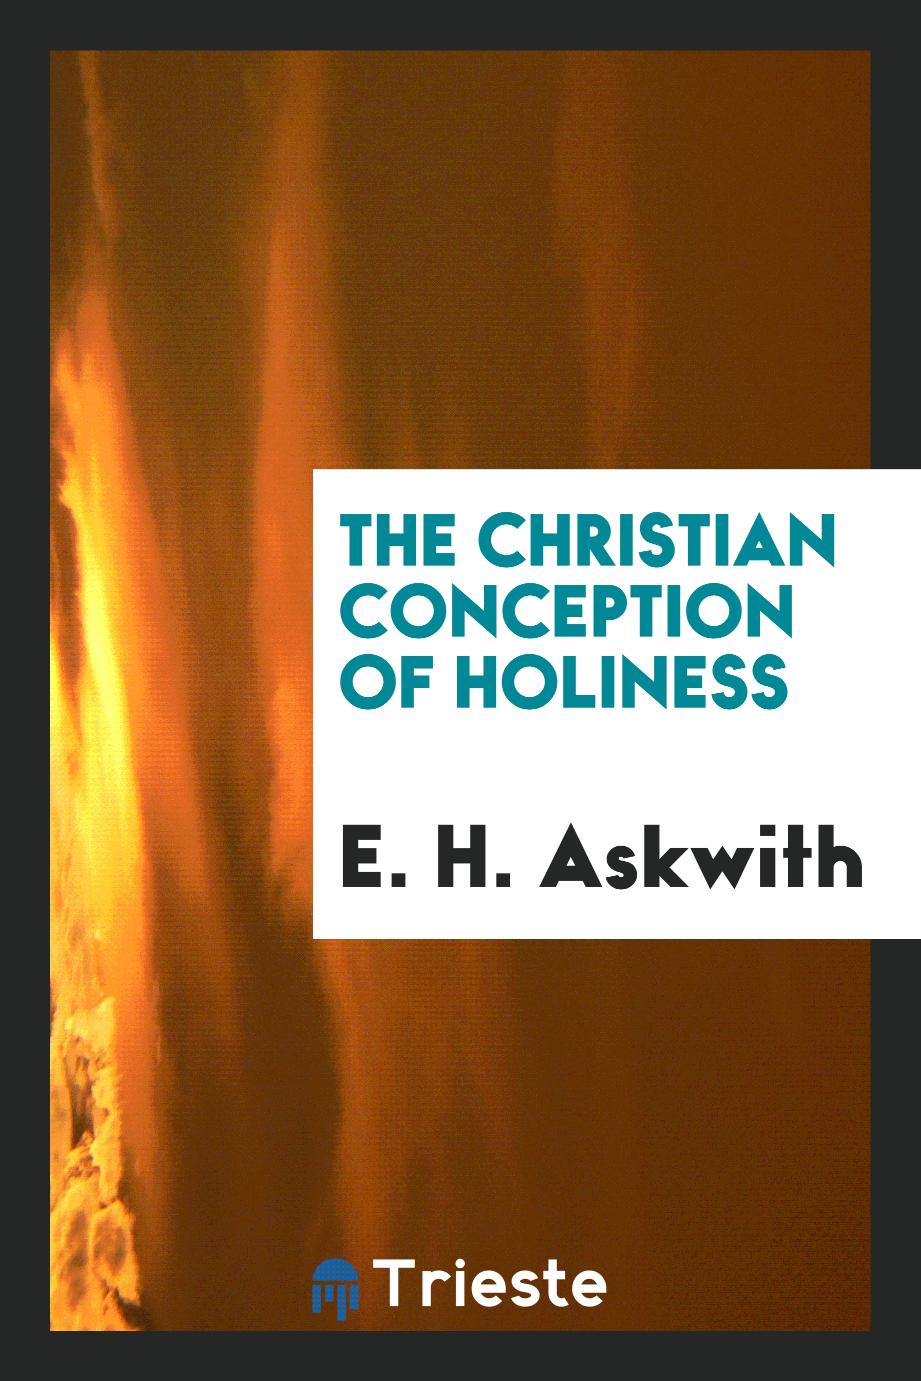 E. H. Askwith - The Christian conception of holiness